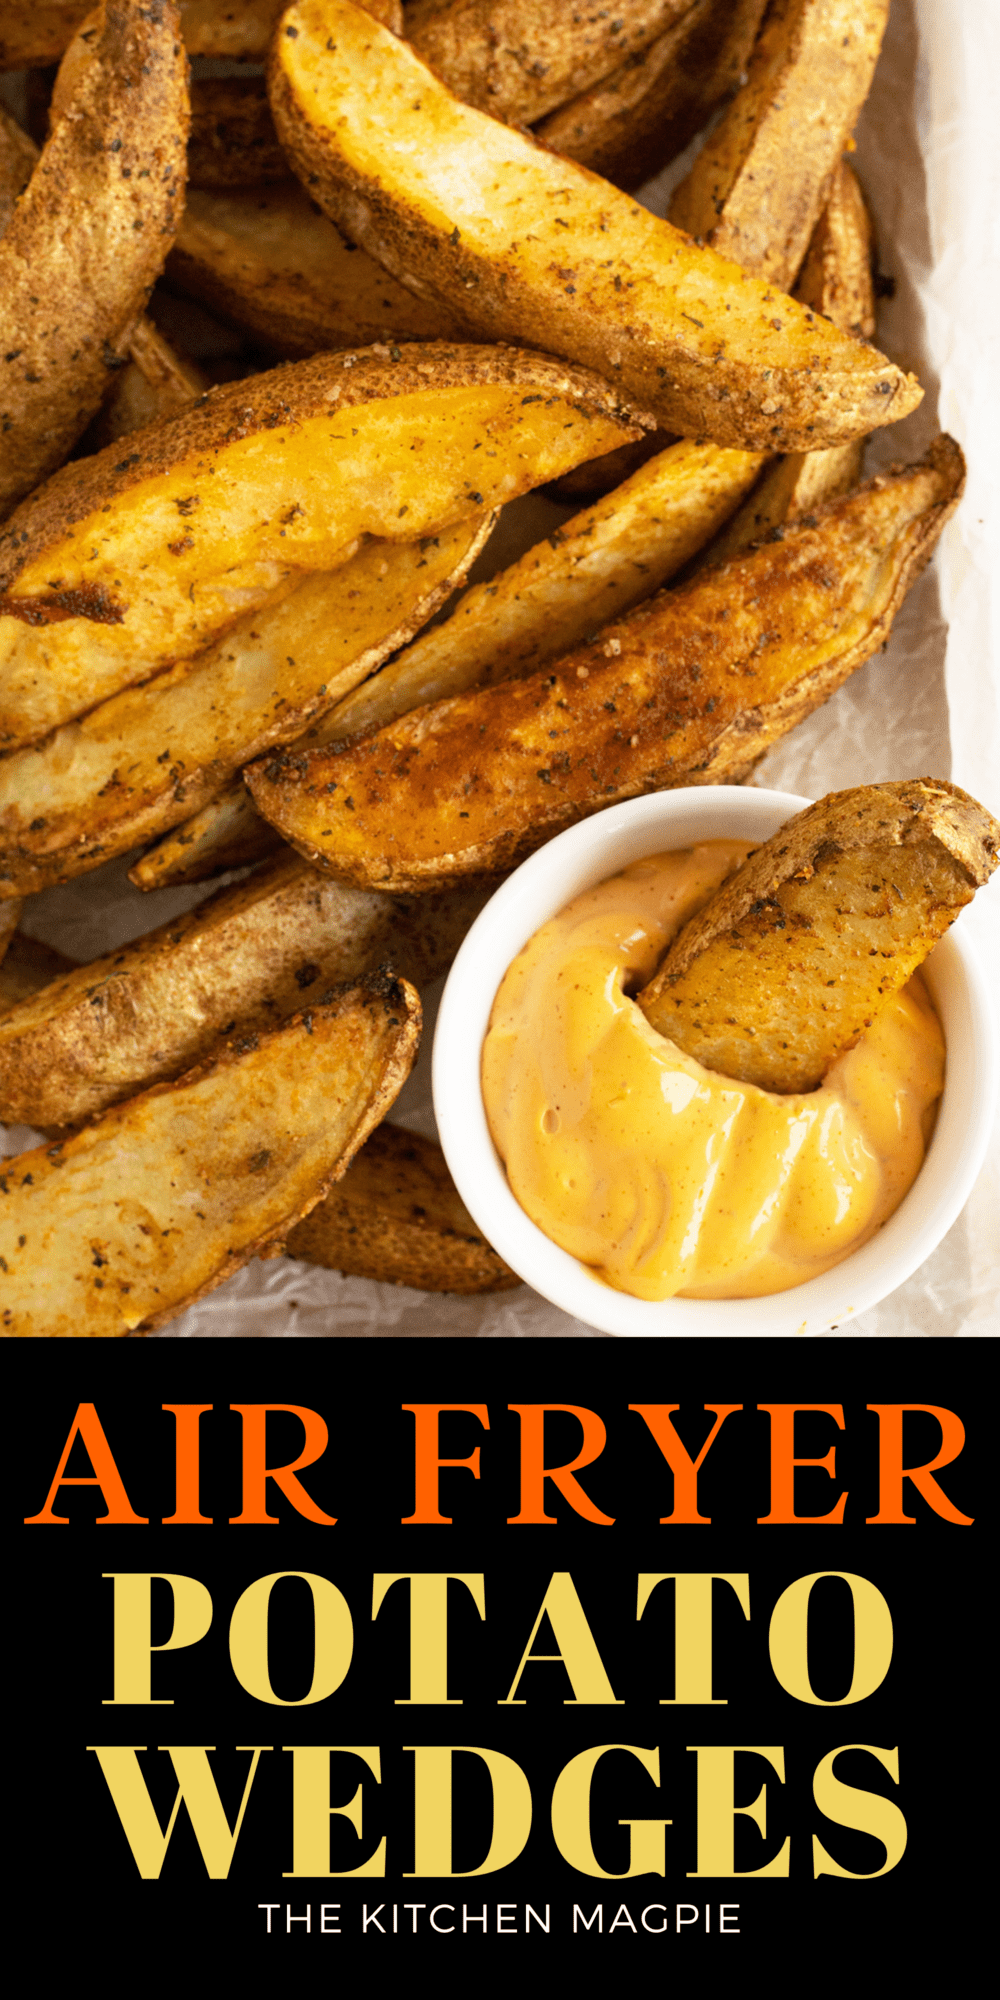 Simple, crispy, and satisfying, good potato wedges are easy to make at home in your own air fryer!